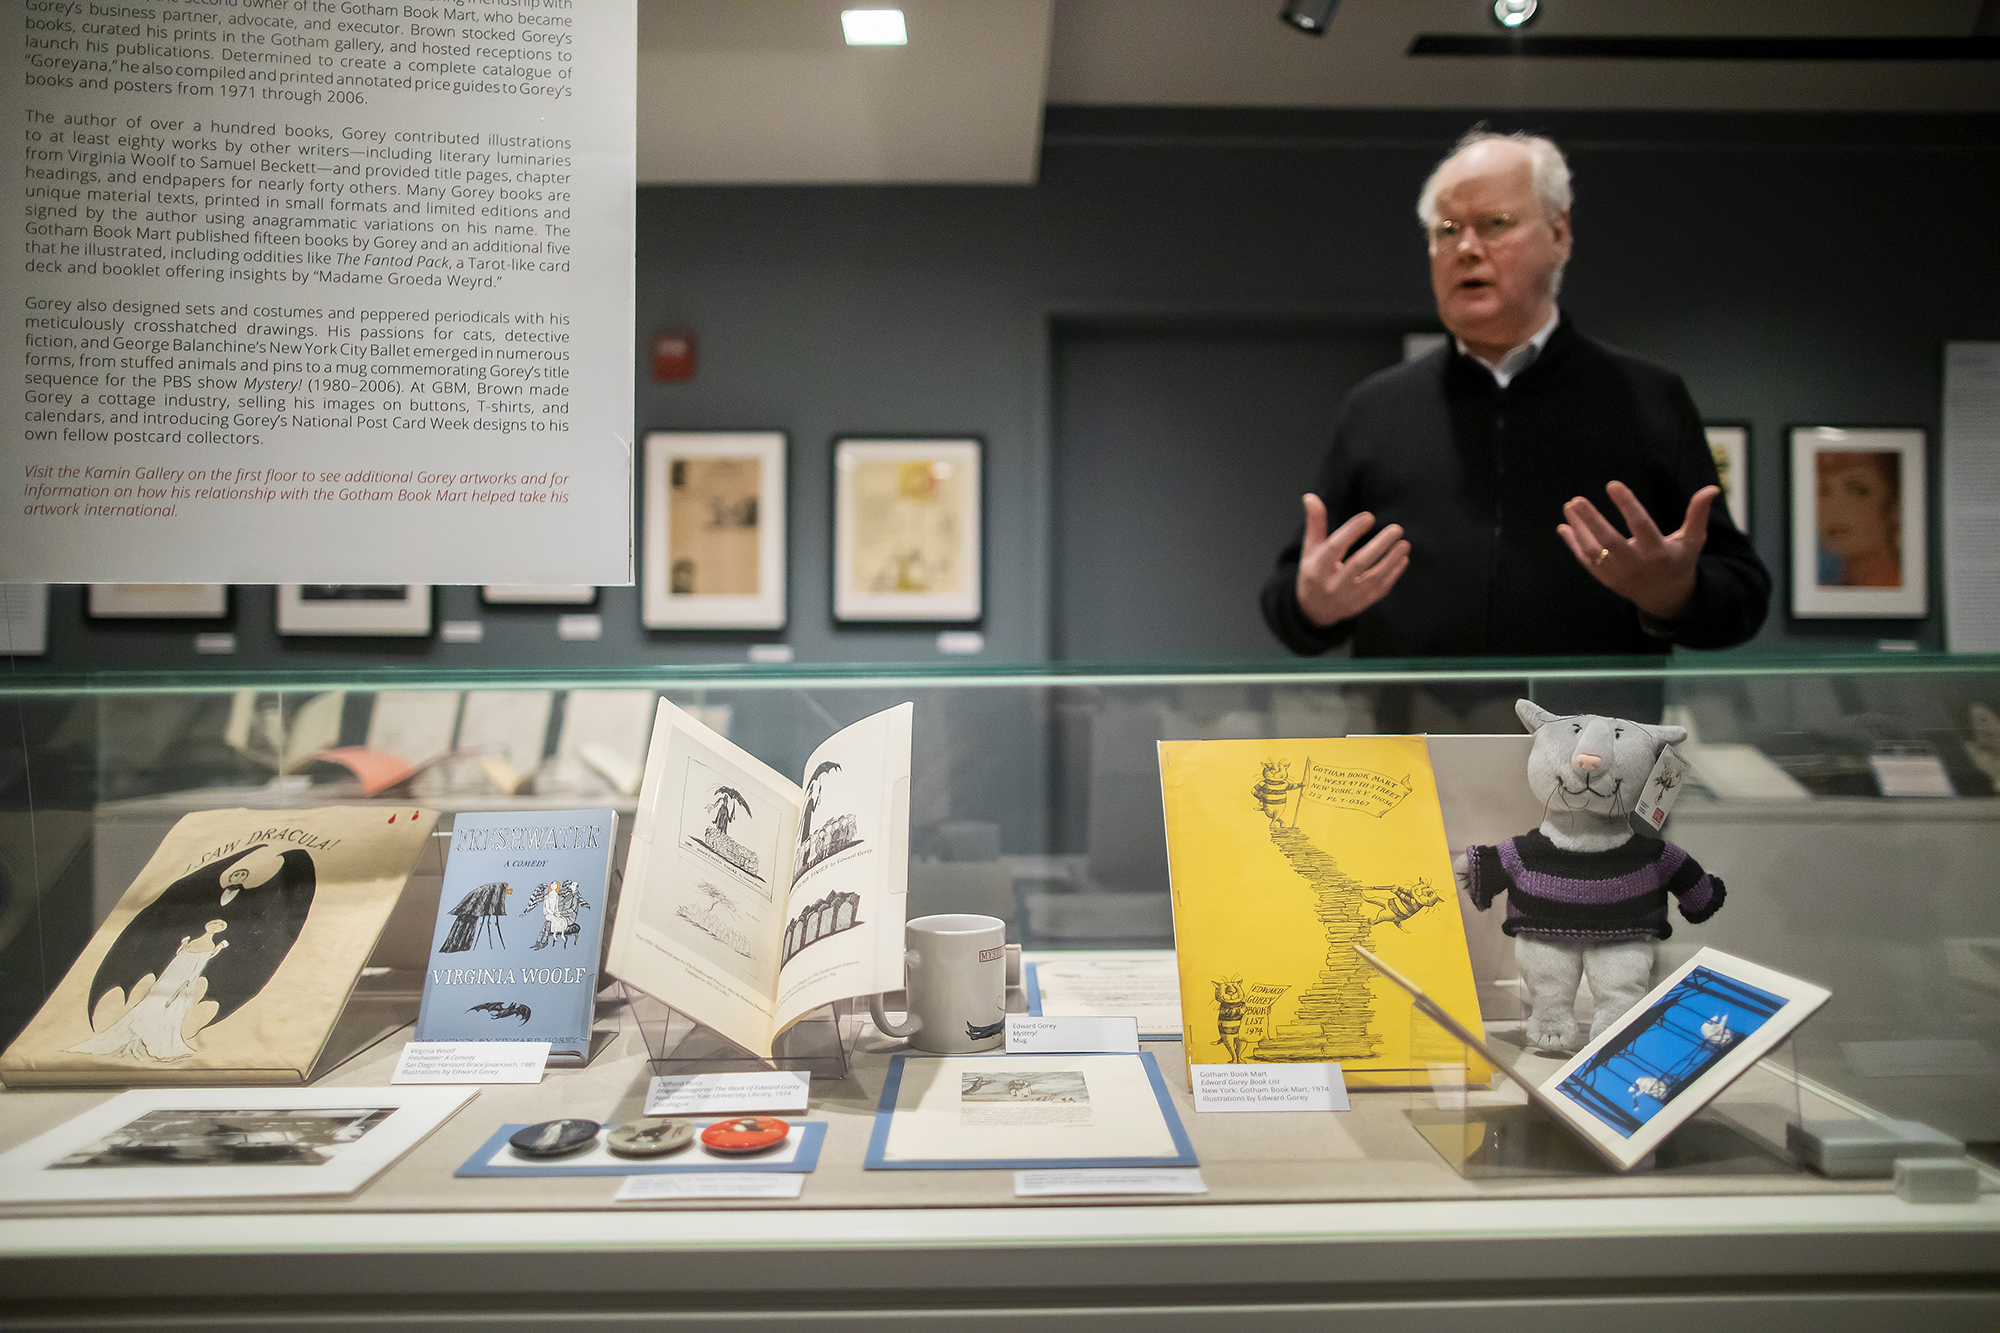 Librarian standing behind museum display case holding several books and illustrations.